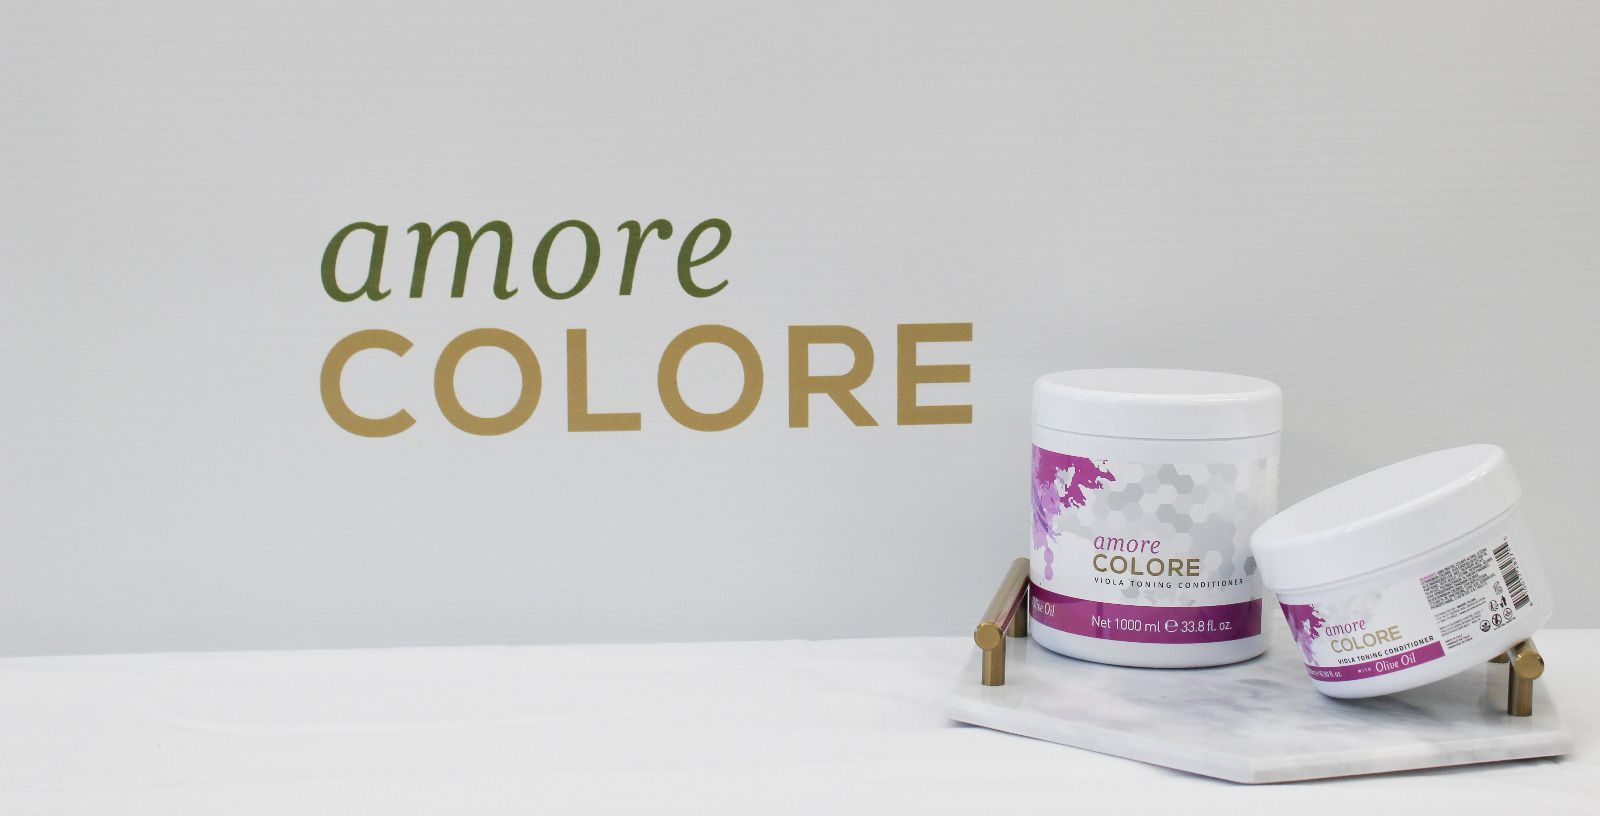 Amore Colore Toning Shampoo and Conditioner